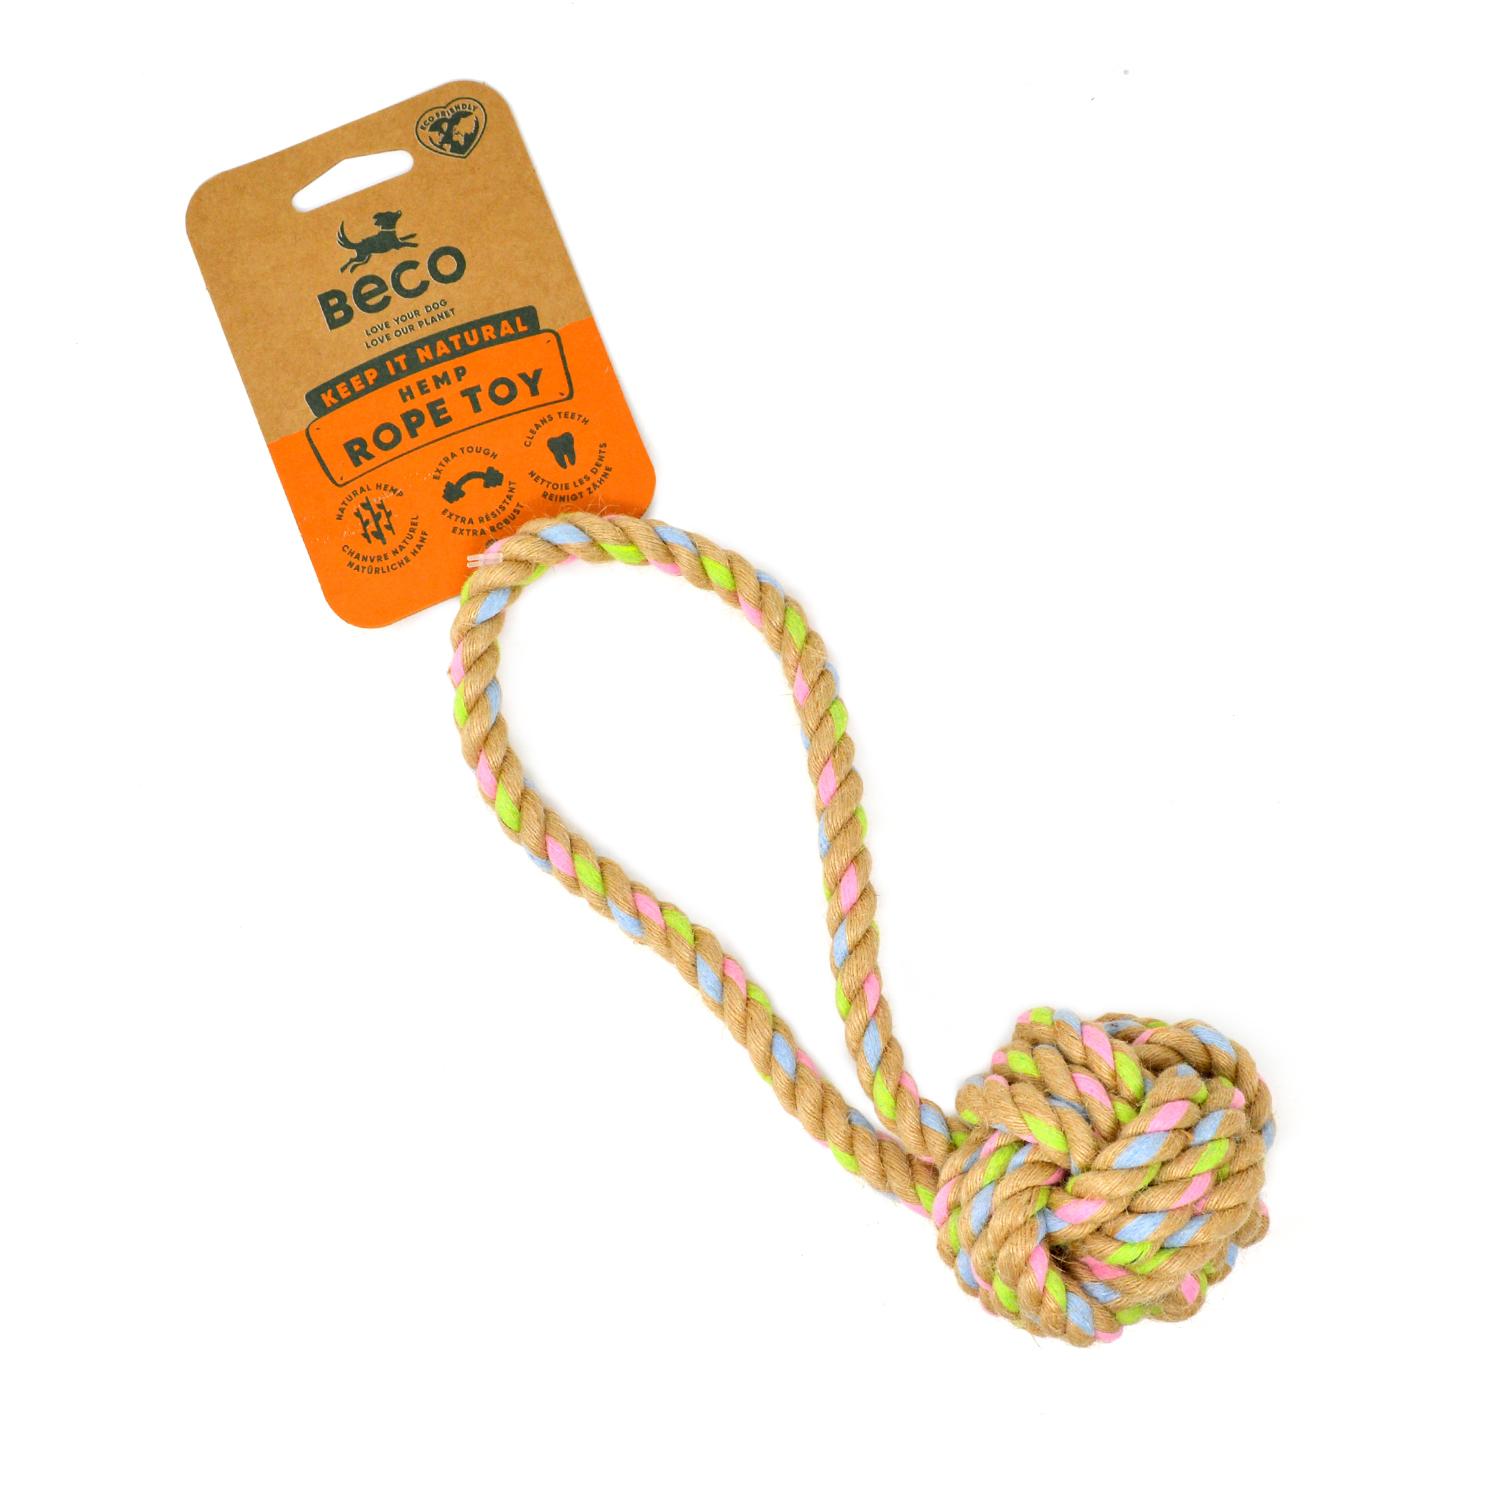 A medium Beco natural hemp rope ball with handle dog toy